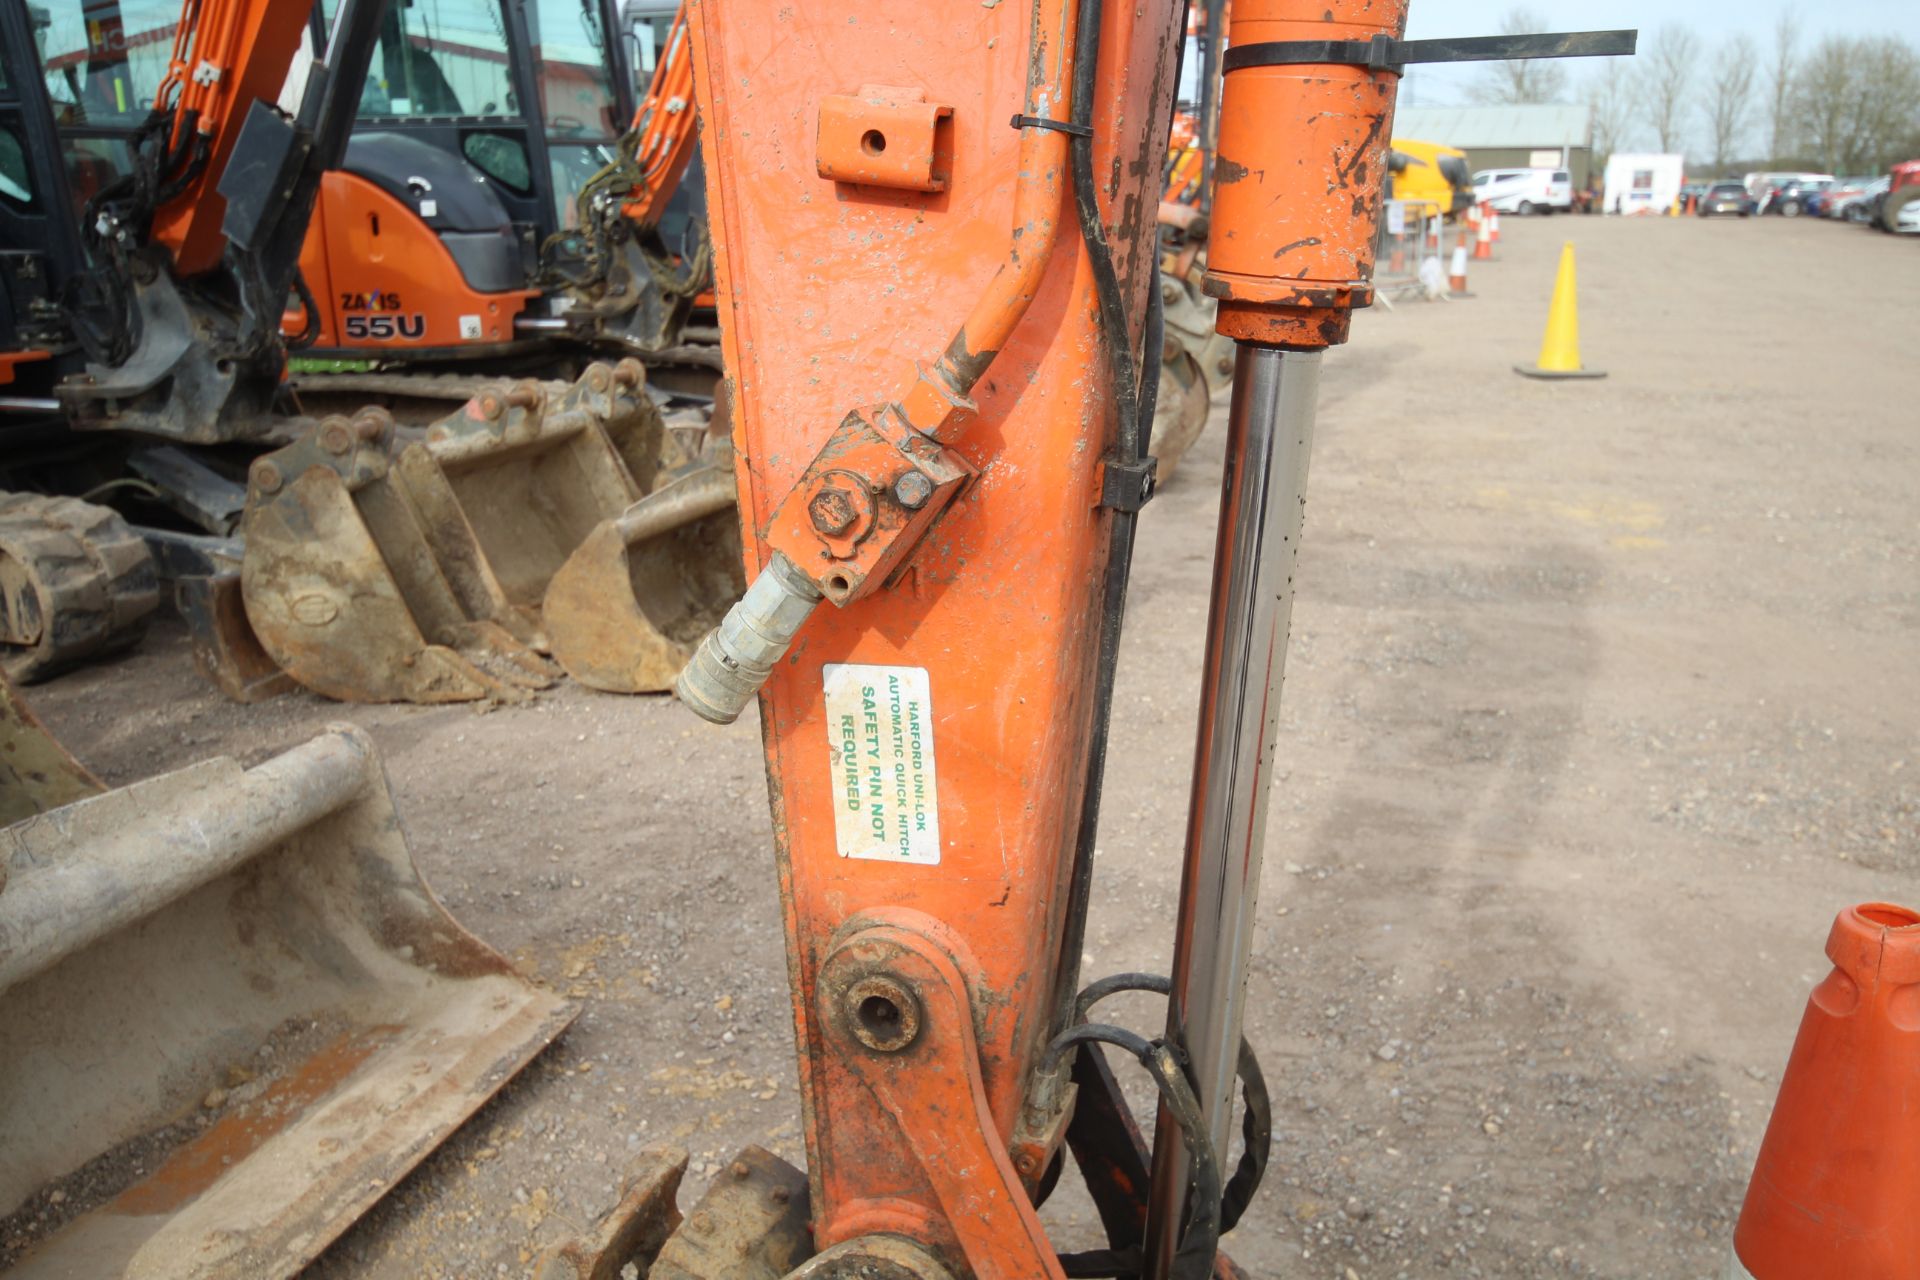 Hitachi Z-Axis 85-USB LC-3 8.5T rubber track excavator. 2012. 7,217 hours. Serial number HCM - Image 6 of 71